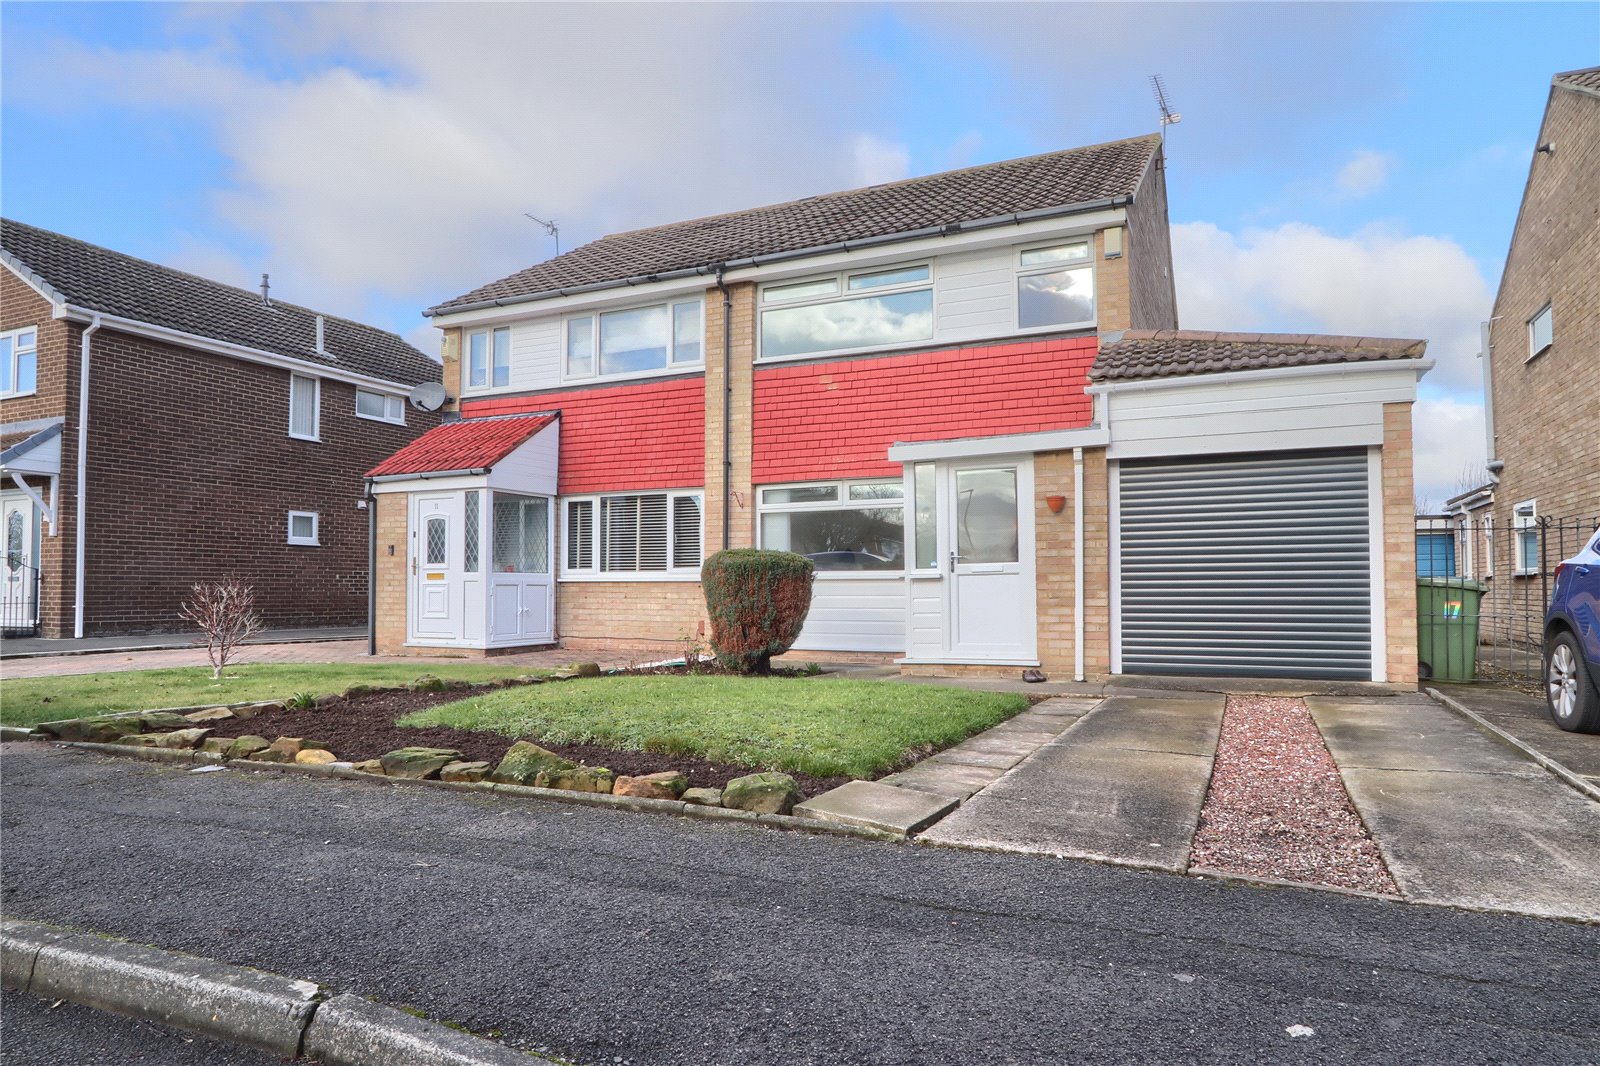 3 bed house for sale in Rook Lane, Norton 1